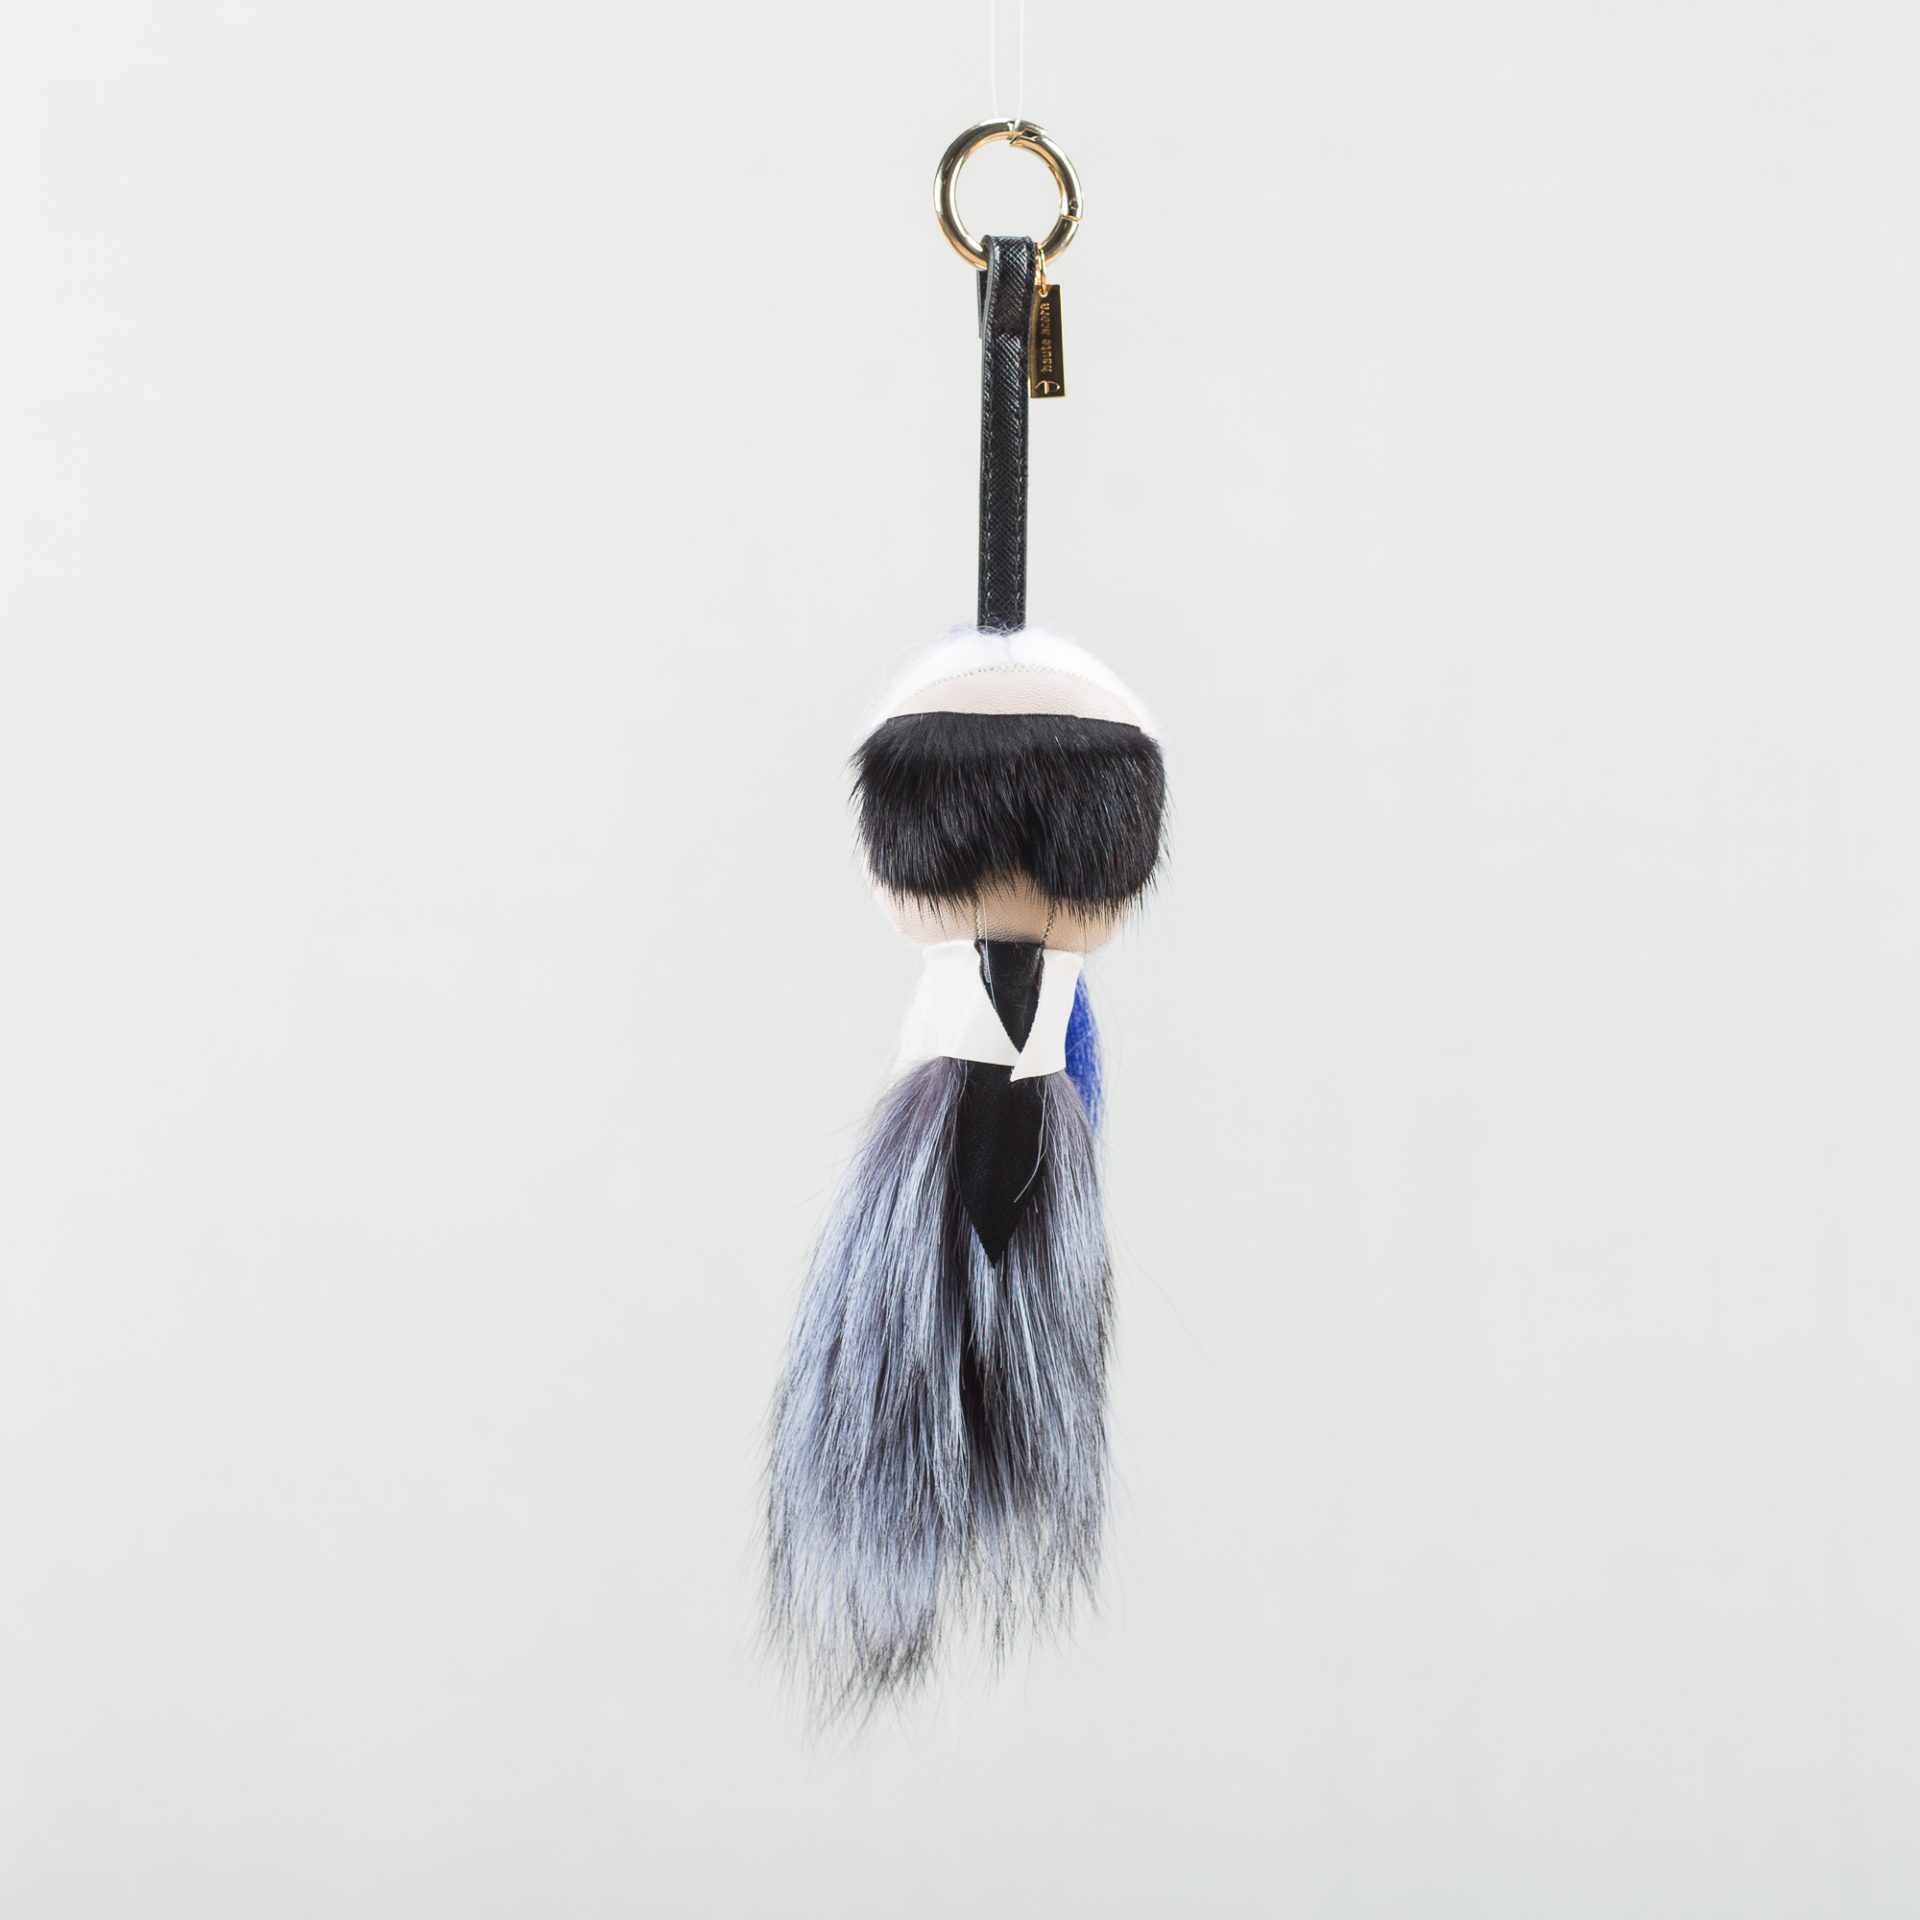 The Blue Notorious K Fur Bag Charm. 100% Real Fur Keychains